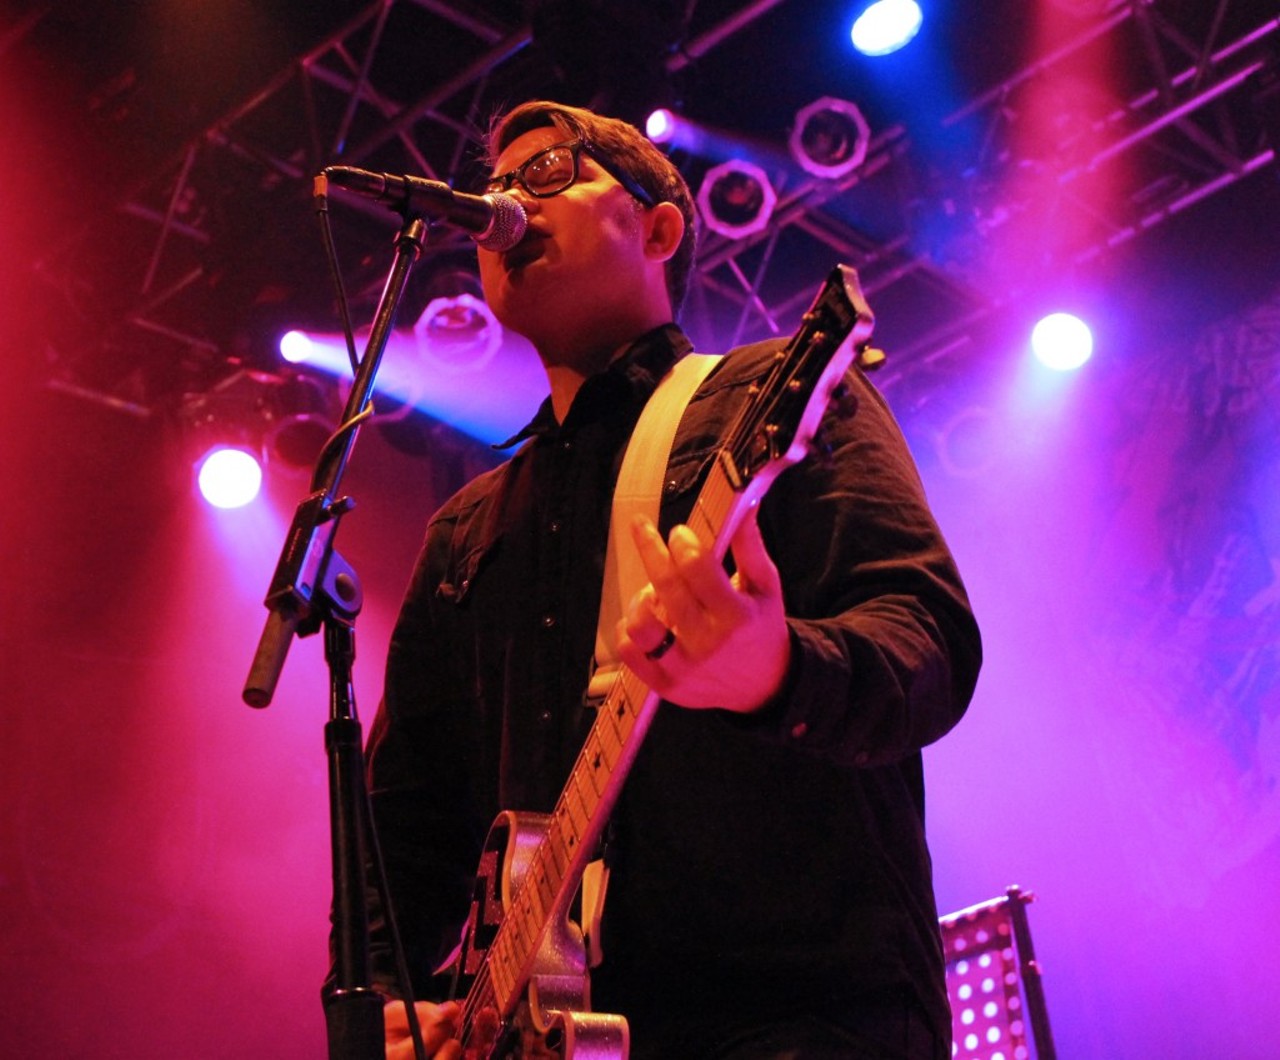 Motion City Soundtrack, Hawthorne Heights, and Teen Spirit Performing at House of Blues